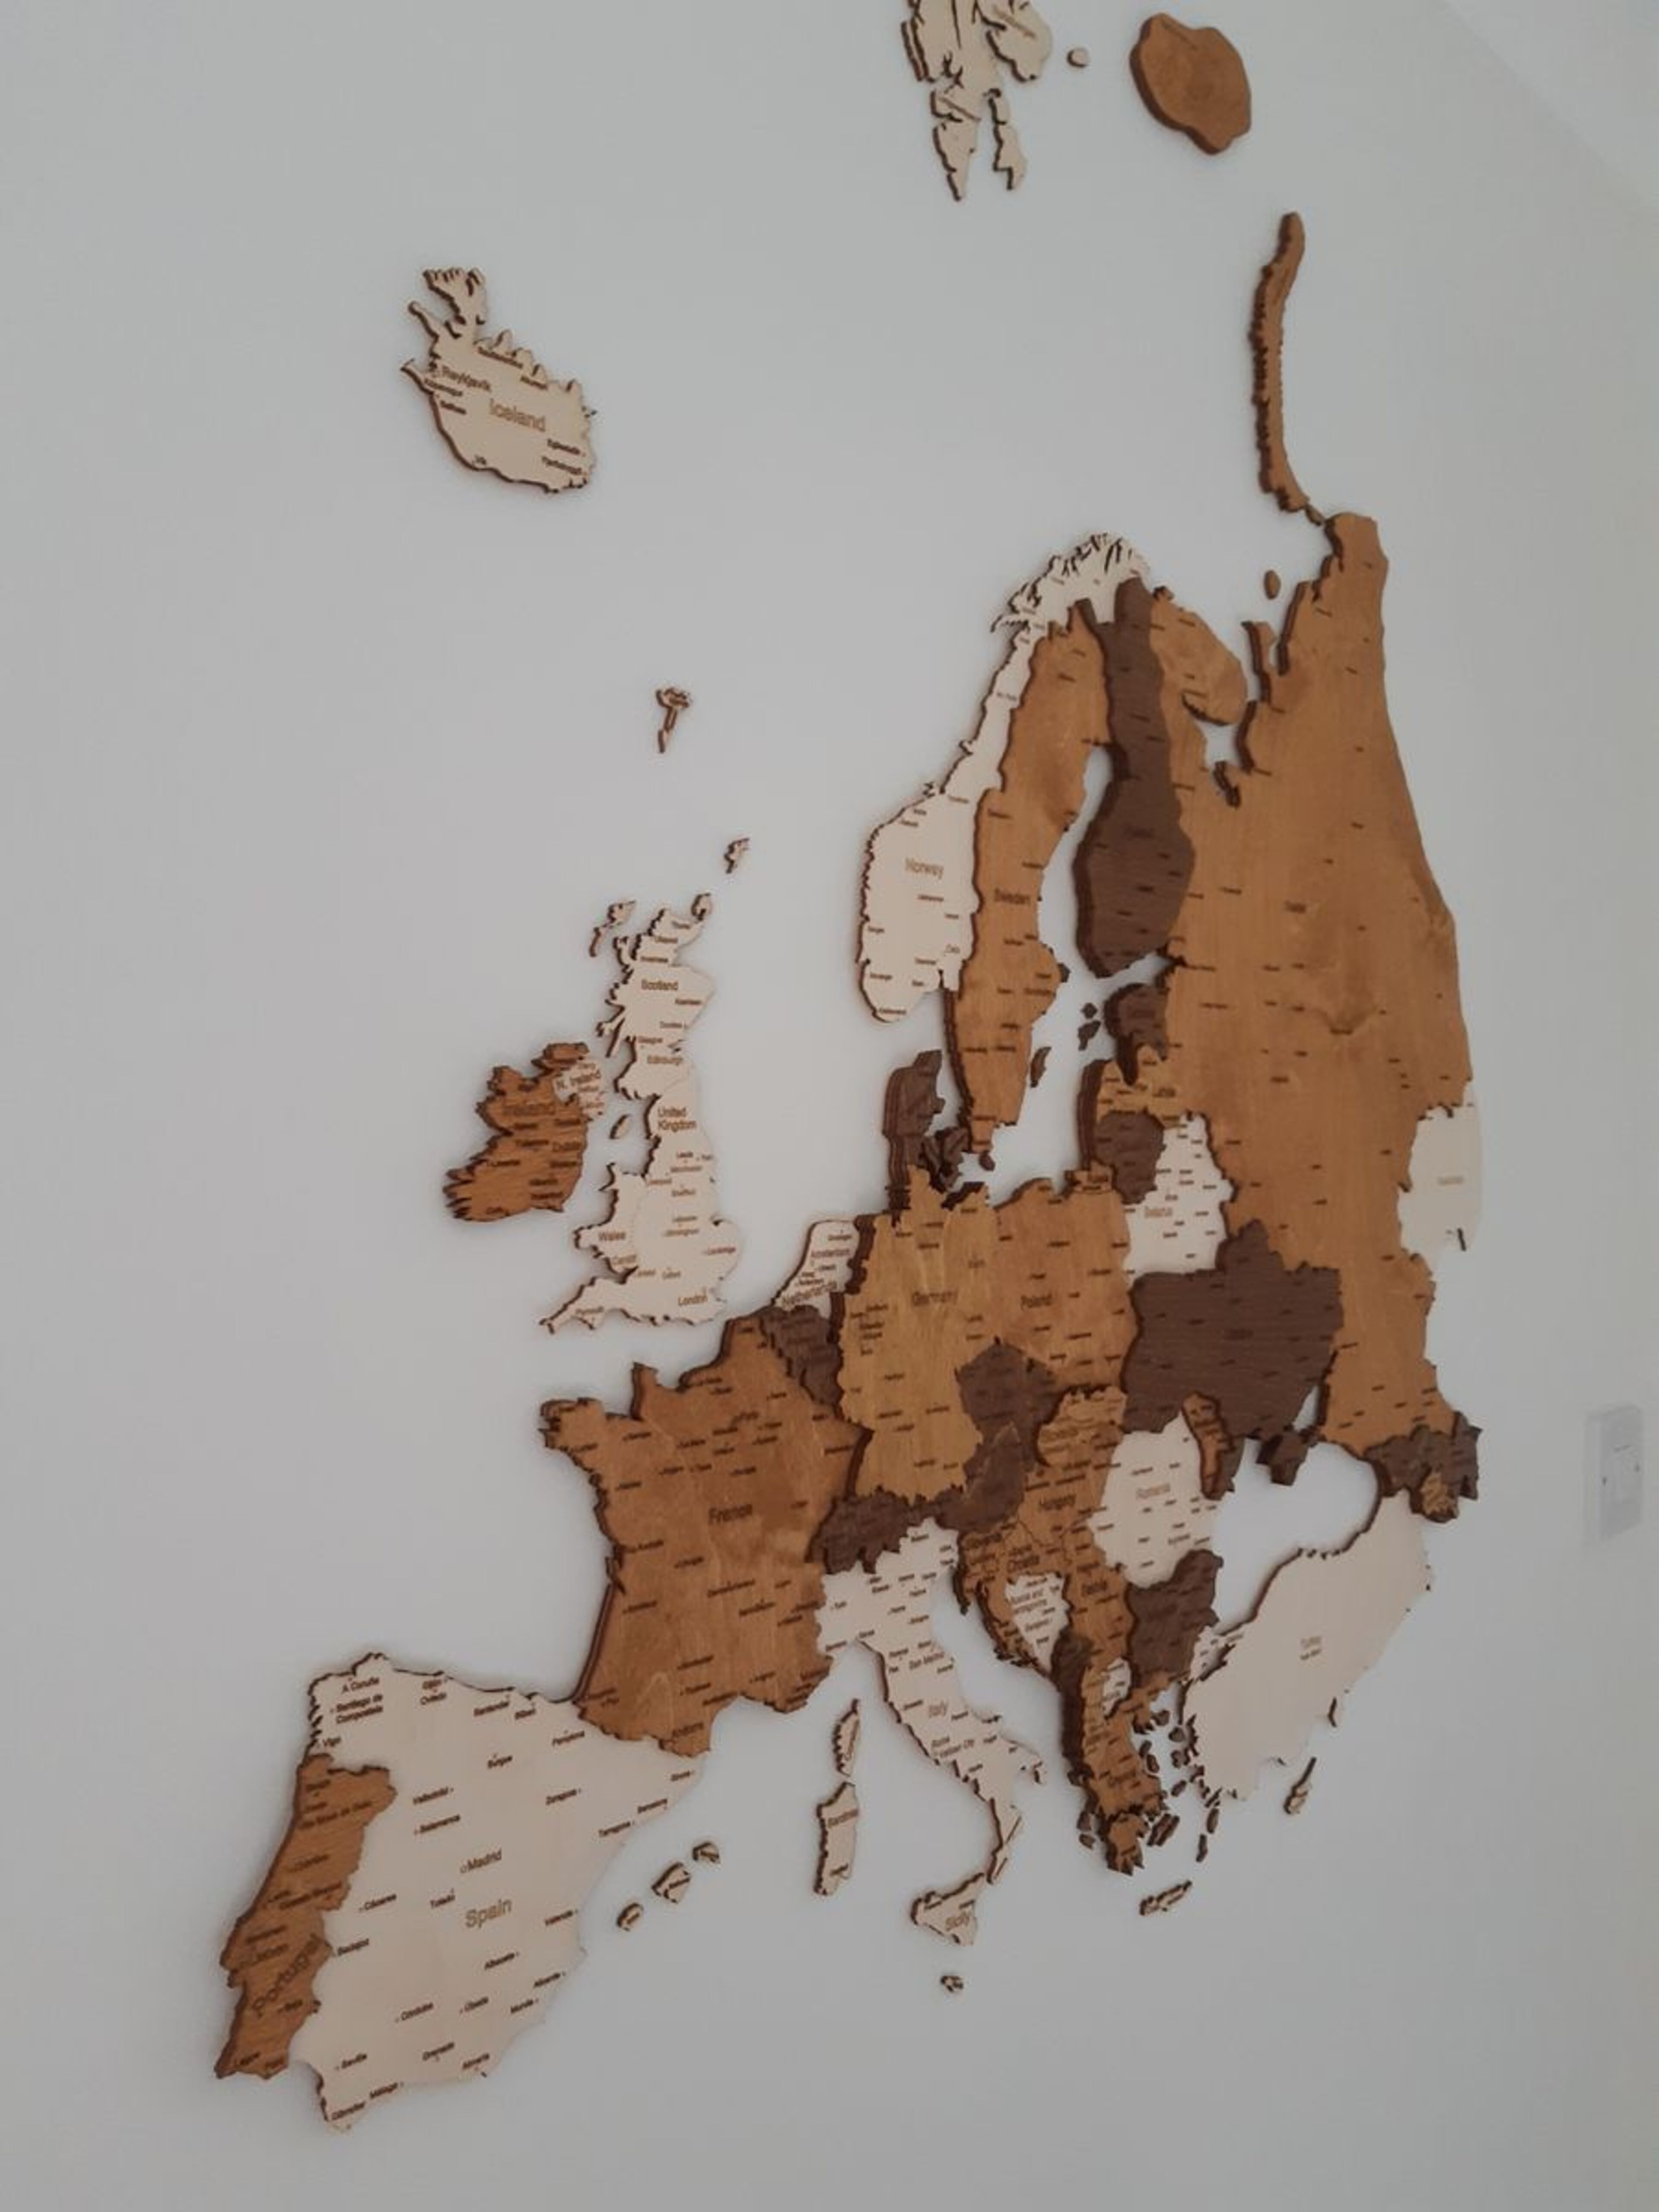 Review for 3D Wooden Wall Map of Europe - image from Matthew